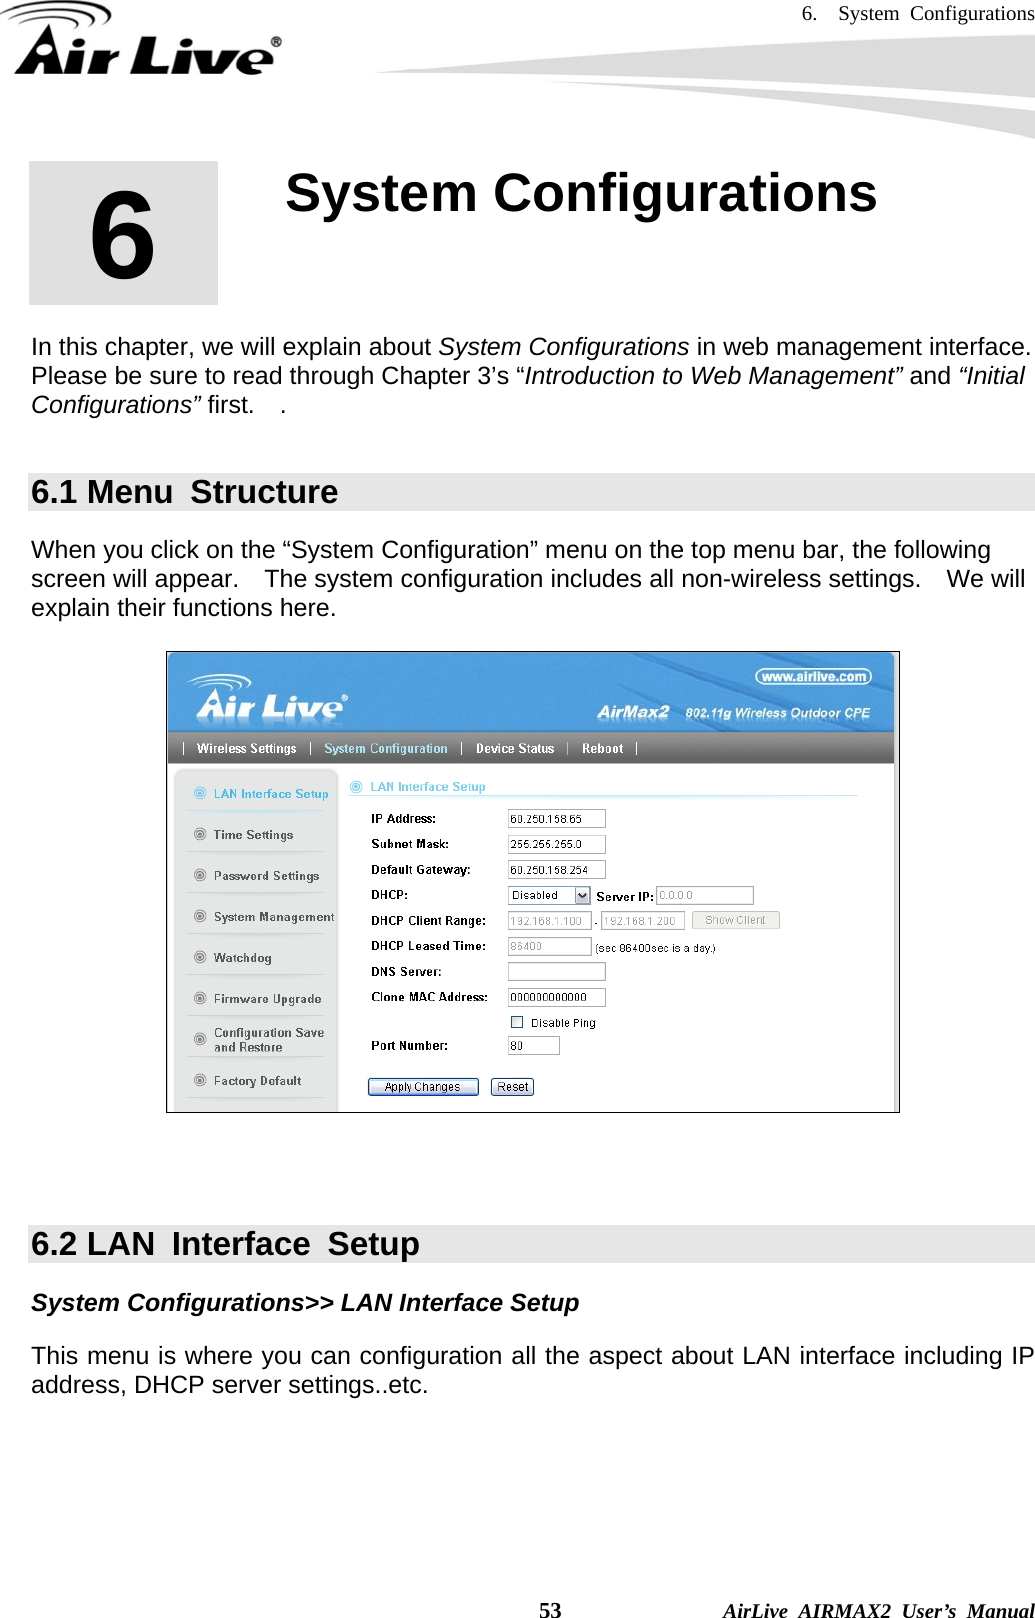 6.  System Configurations    53              AirLive AIRMAX2 User’s Manual       In this chapter, we will explain about System Configurations in web management interface.   Please be sure to read through Chapter 3’s “Introduction to Web Management” and “Initial Configurations” first.  .   6.1 Menu  Structure When you click on the “System Configuration” menu on the top menu bar, the following screen will appear.    The system configuration includes all non-wireless settings.    We will explain their functions here.      6.2 LAN  Interface  Setup System Configurations&gt;&gt; LAN Interface Setup This menu is where you can configuration all the aspect about LAN interface including IP address, DHCP server settings..etc.  6  6. System Configurations  